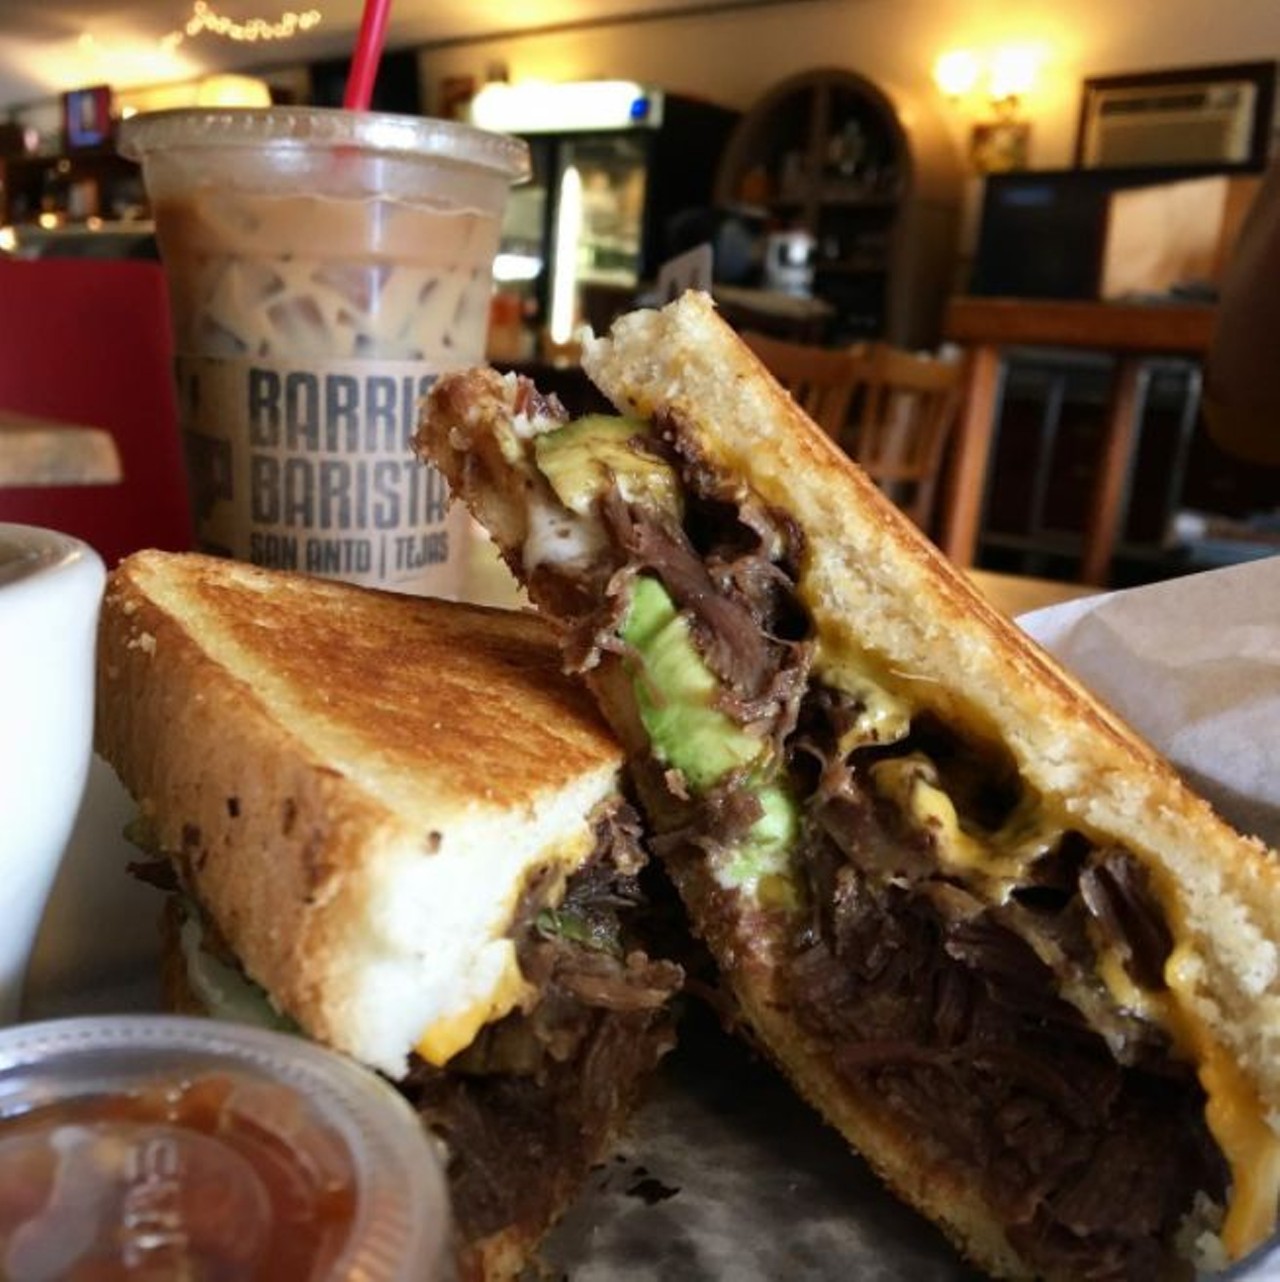  Barbacoa grilled cheese from Barrio Barista
3735 Culebra Rd, (210) 519-5403
This is THE quintessential San Anto food item. Fresh barbacoa, two types of cheese, Texas toast meet to create one extremely memorable sando. 
Photo by Jessica Elizarraras